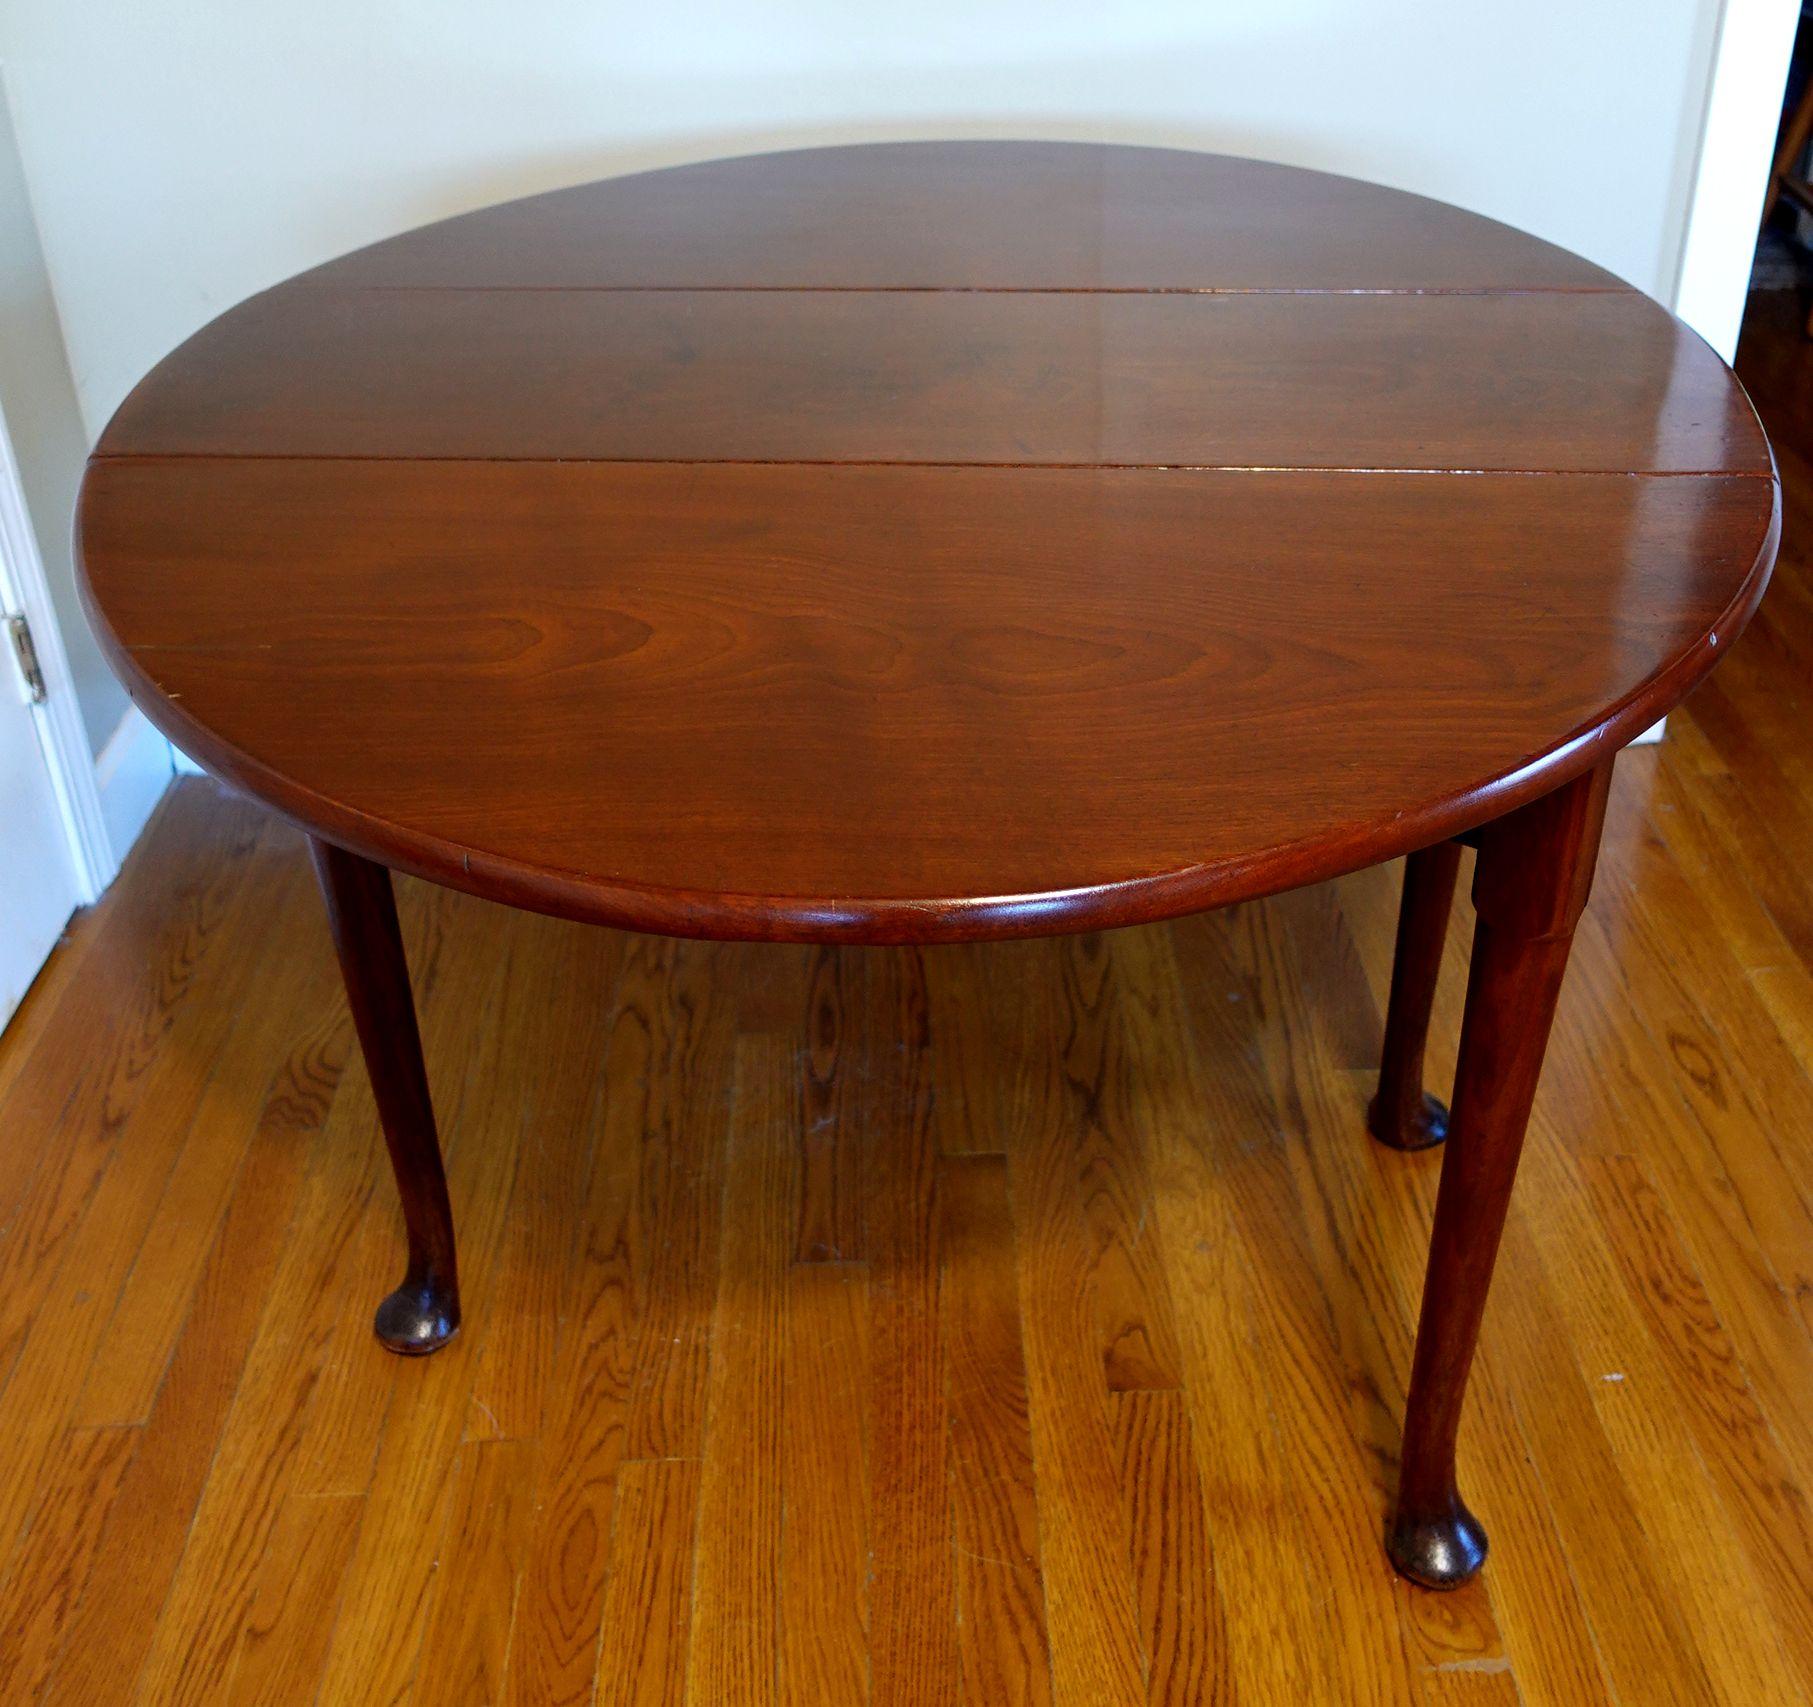 18th Century and Earlier 1750 Queen Anne Table with Oval Drop Leaves on Turned Legs For Sale